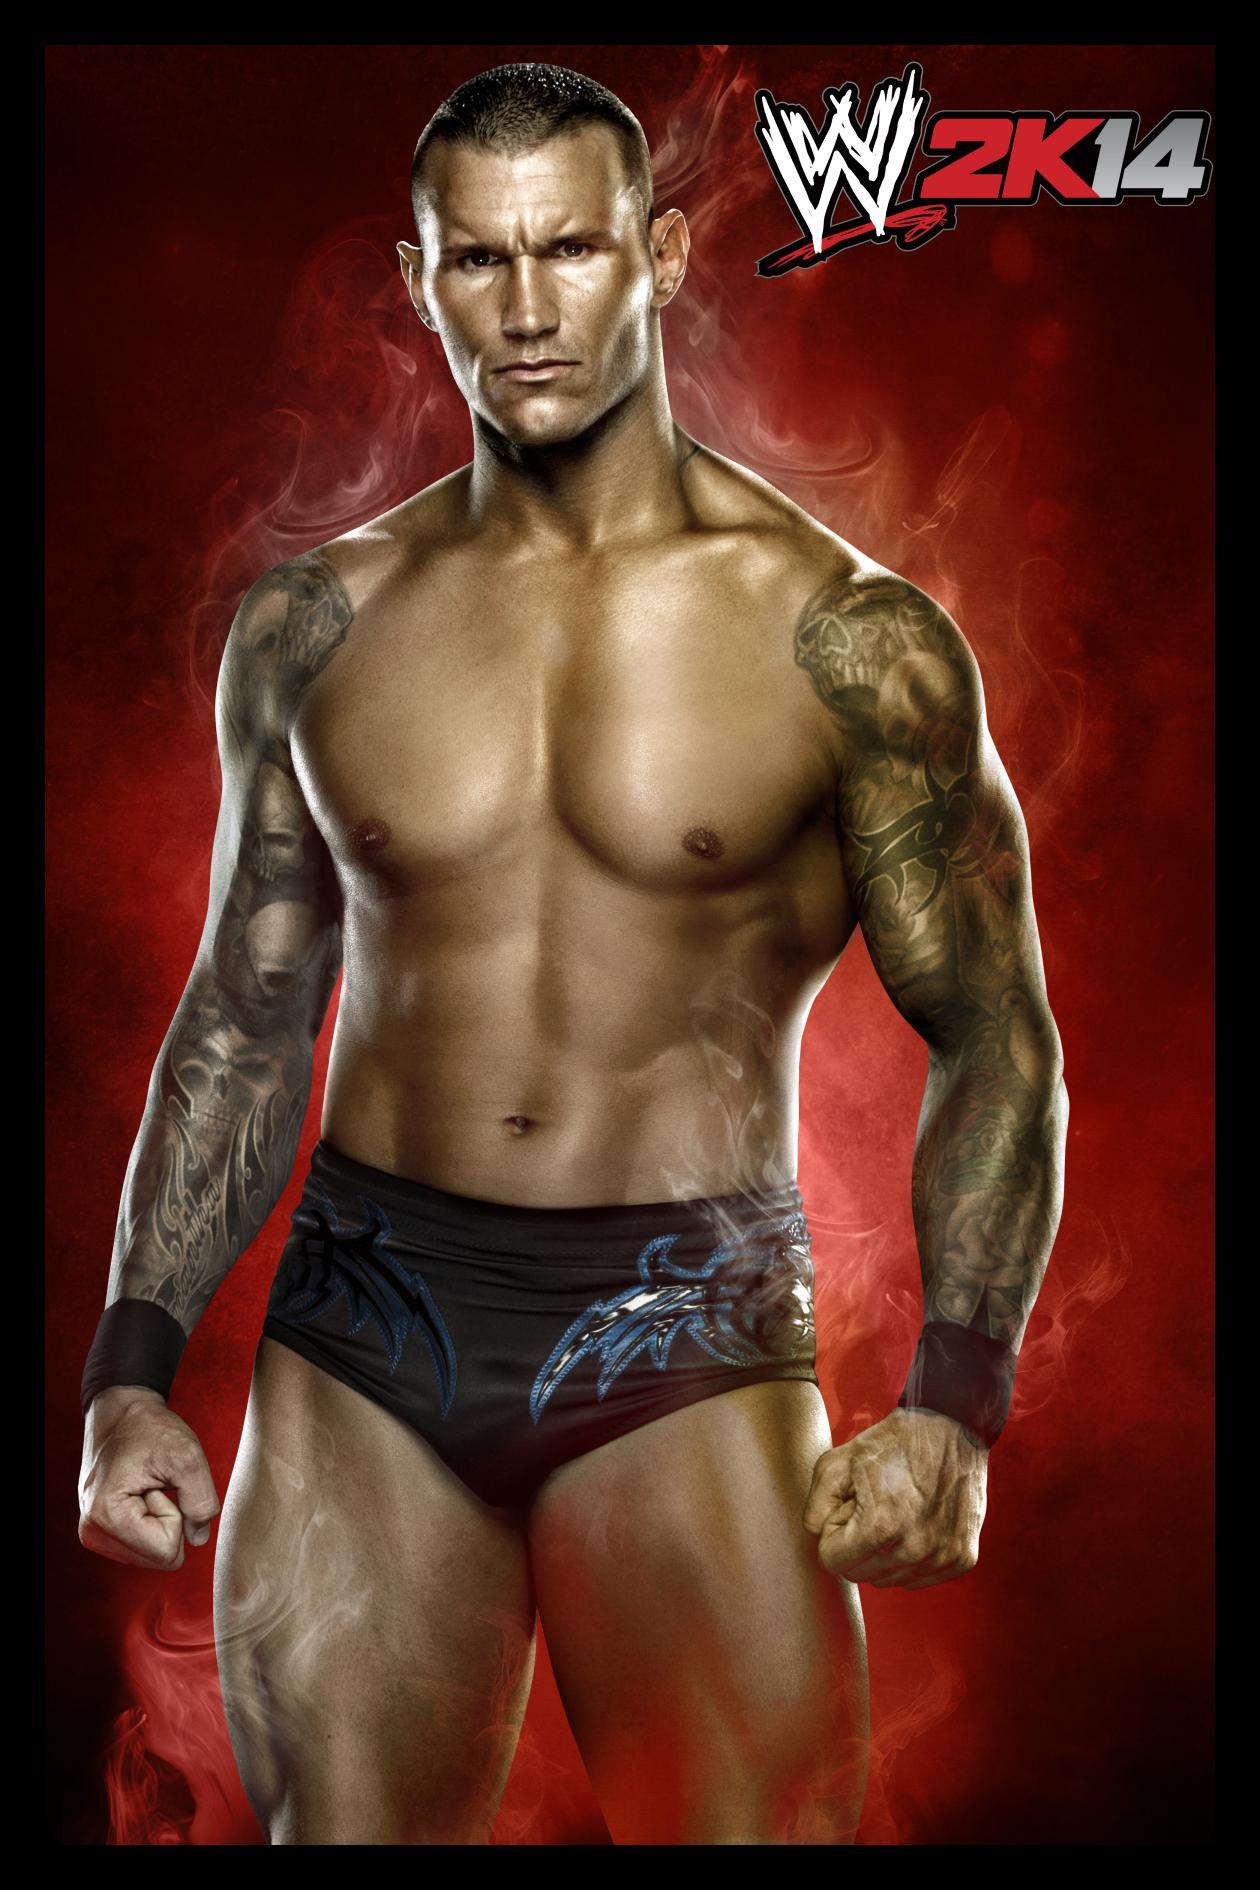 WWE 2K14&;s full character roster revealed, get the list & pics